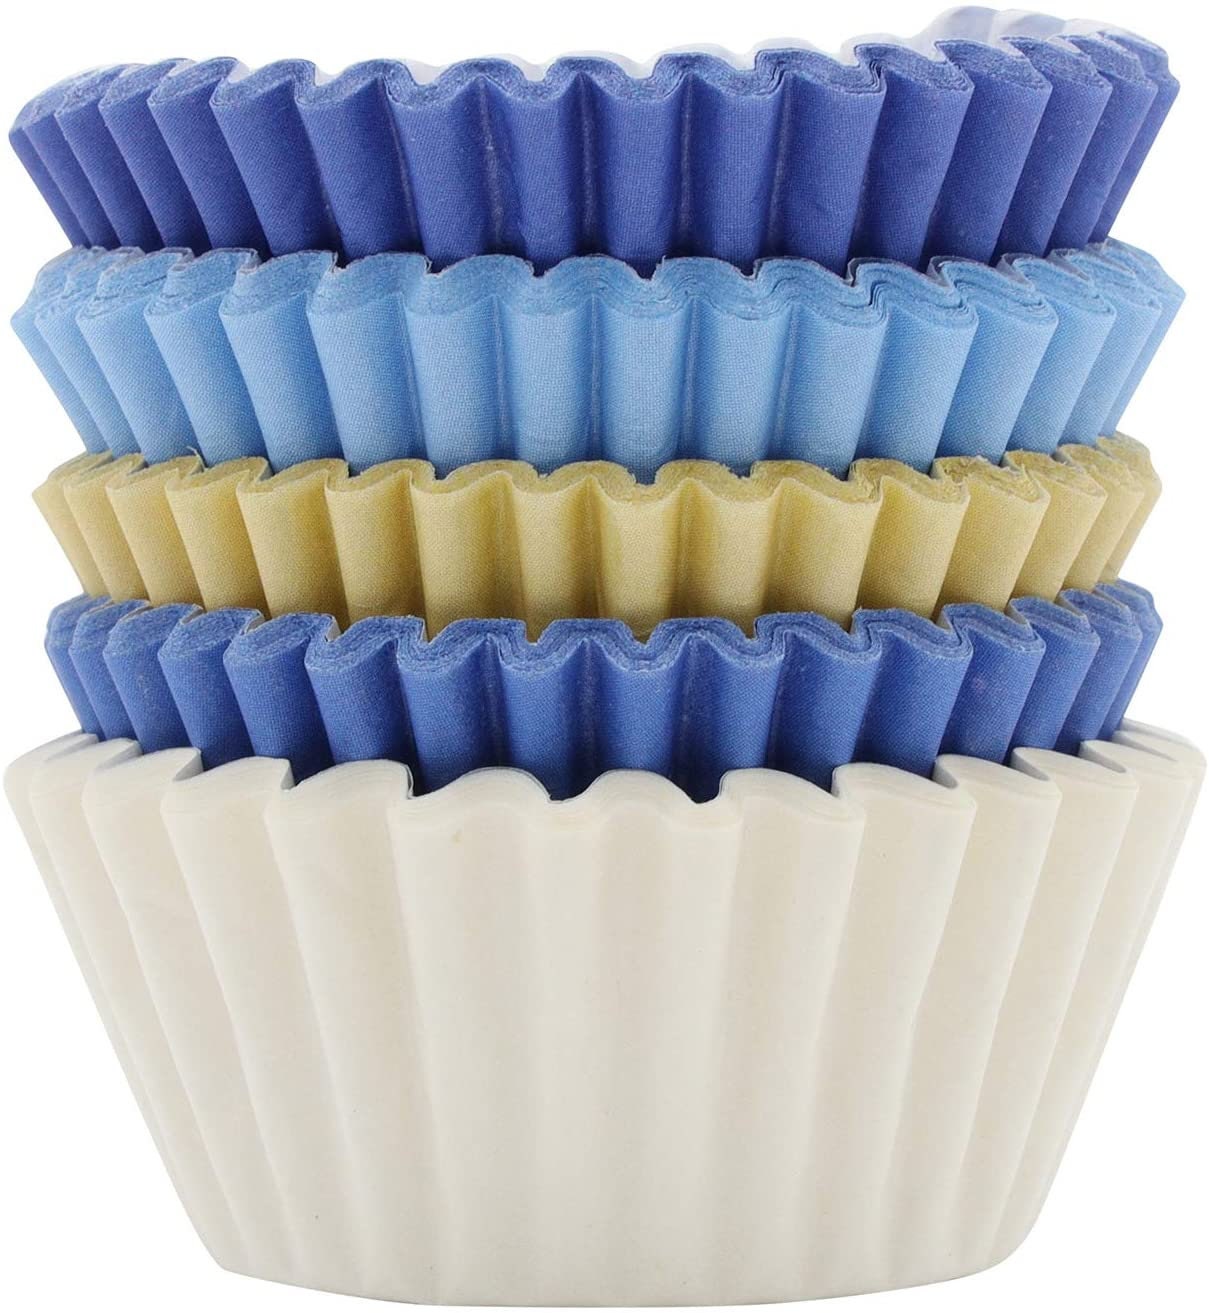 100 Mini Cupcake Cases Baking Muffin Cake for Birthday Party Wedding (Blue Mix) Keechi & co.